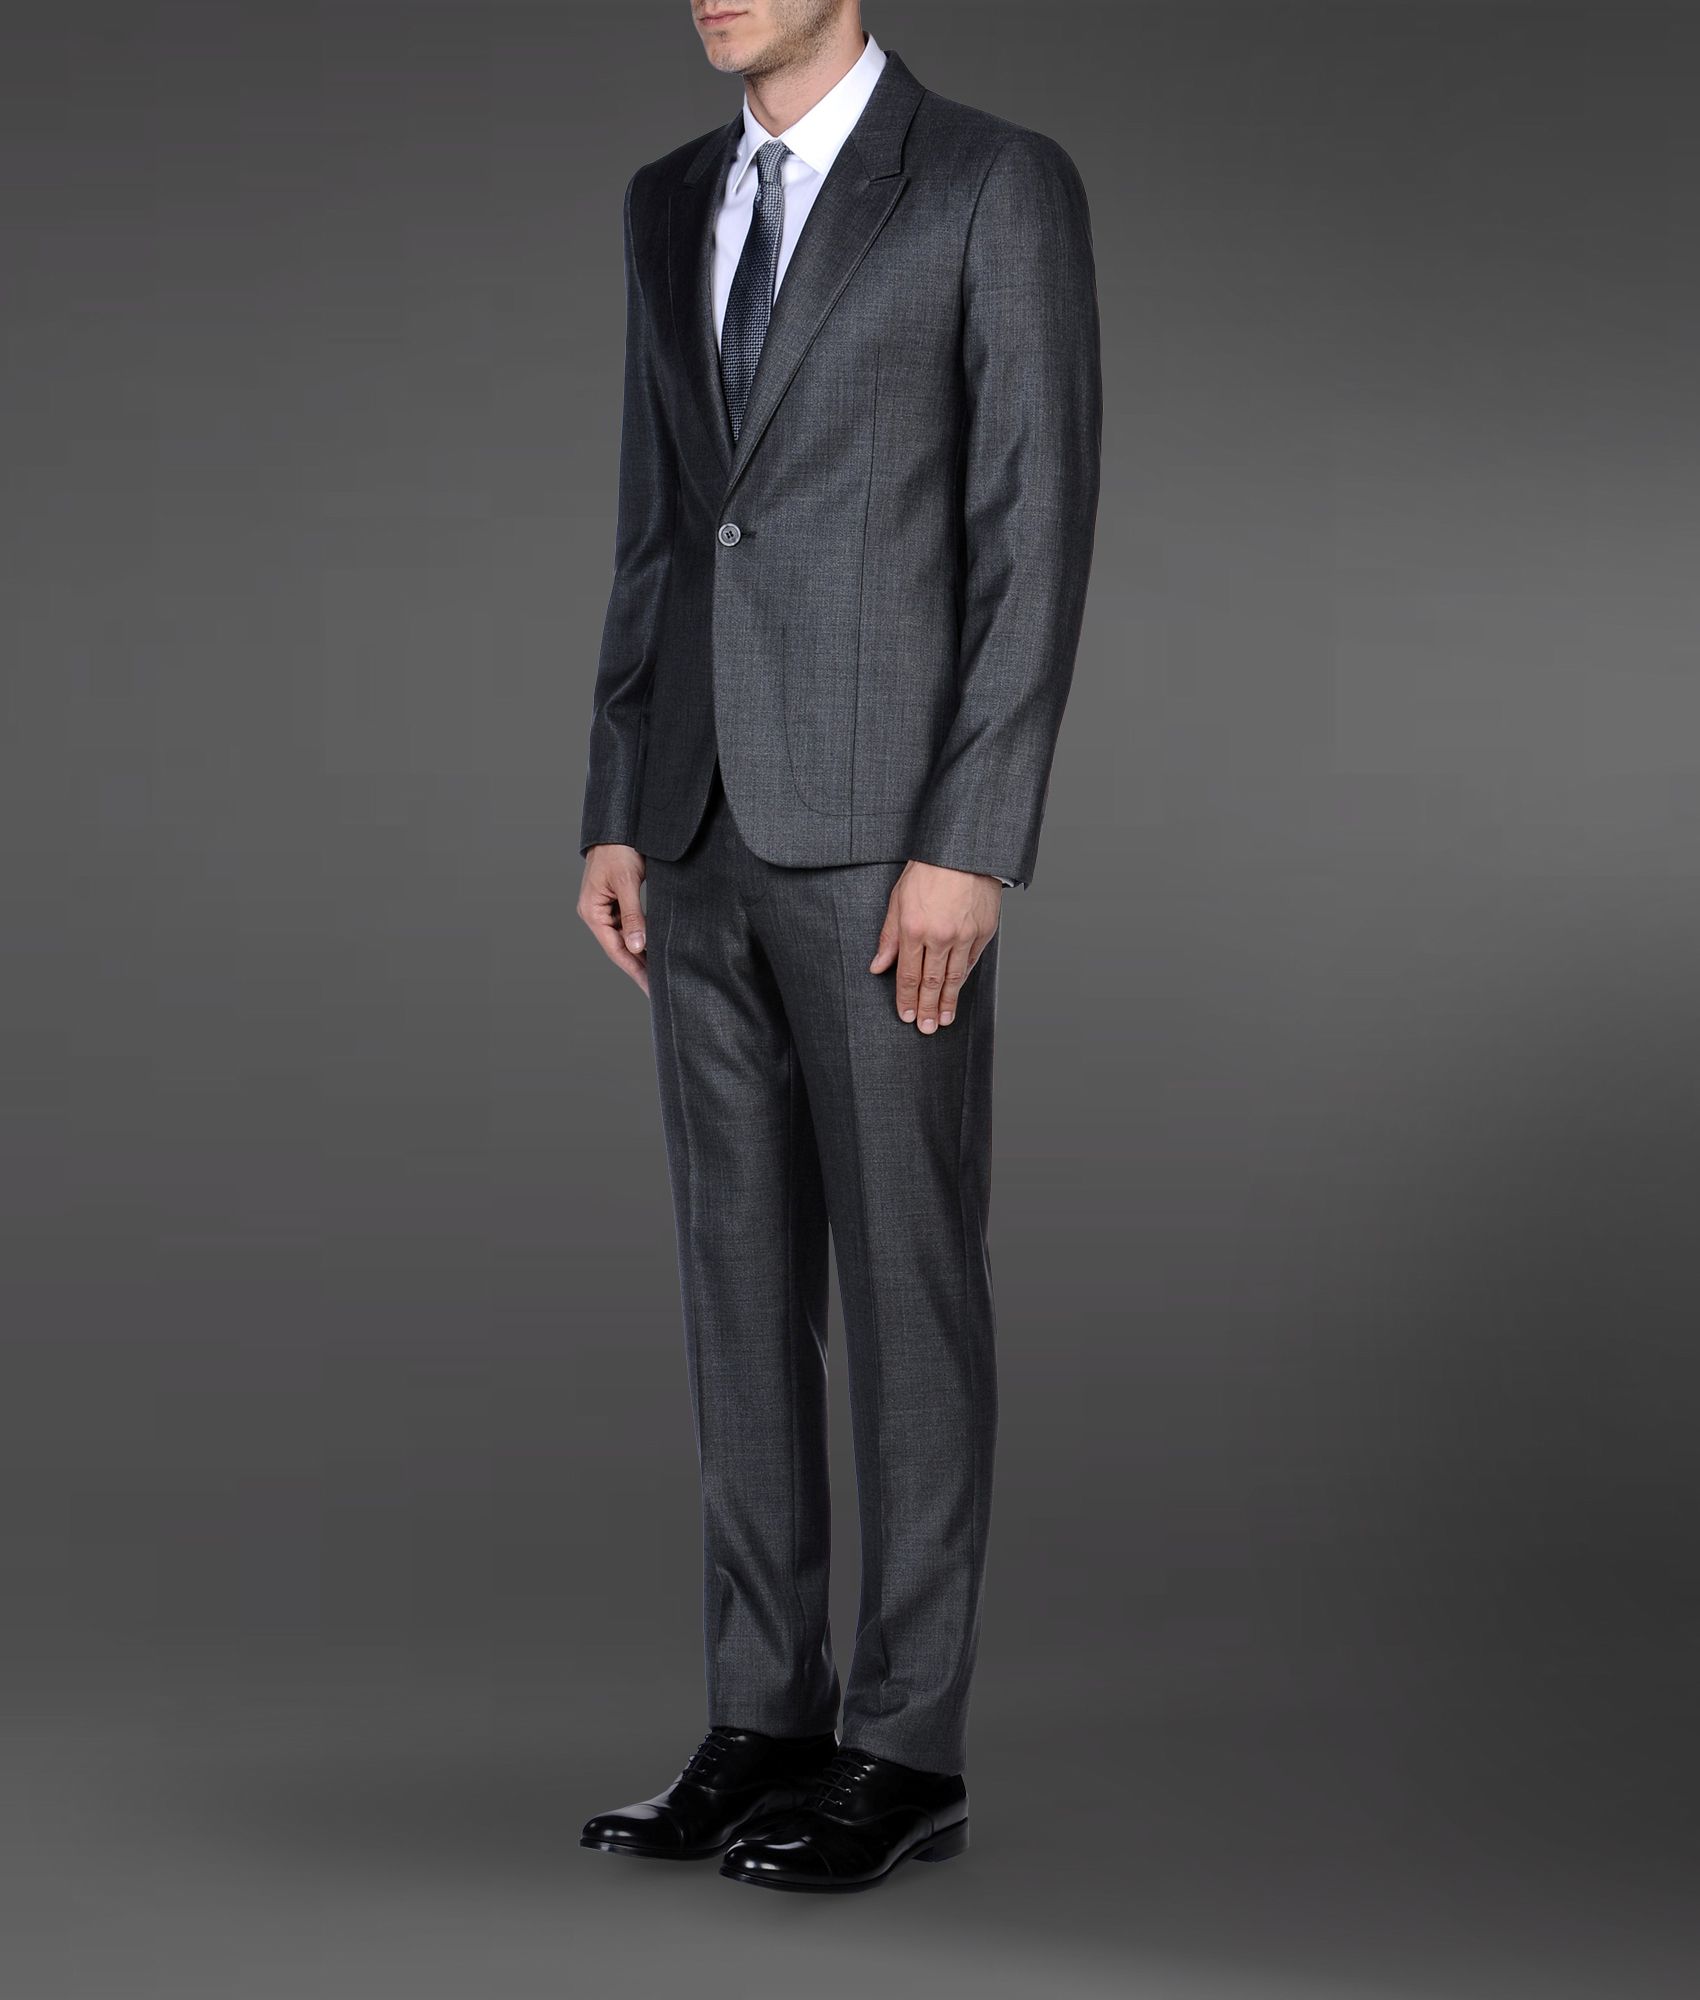 Lyst - Emporio armani Supreme Suit in Stretch Wool and Silk in Gray for Men